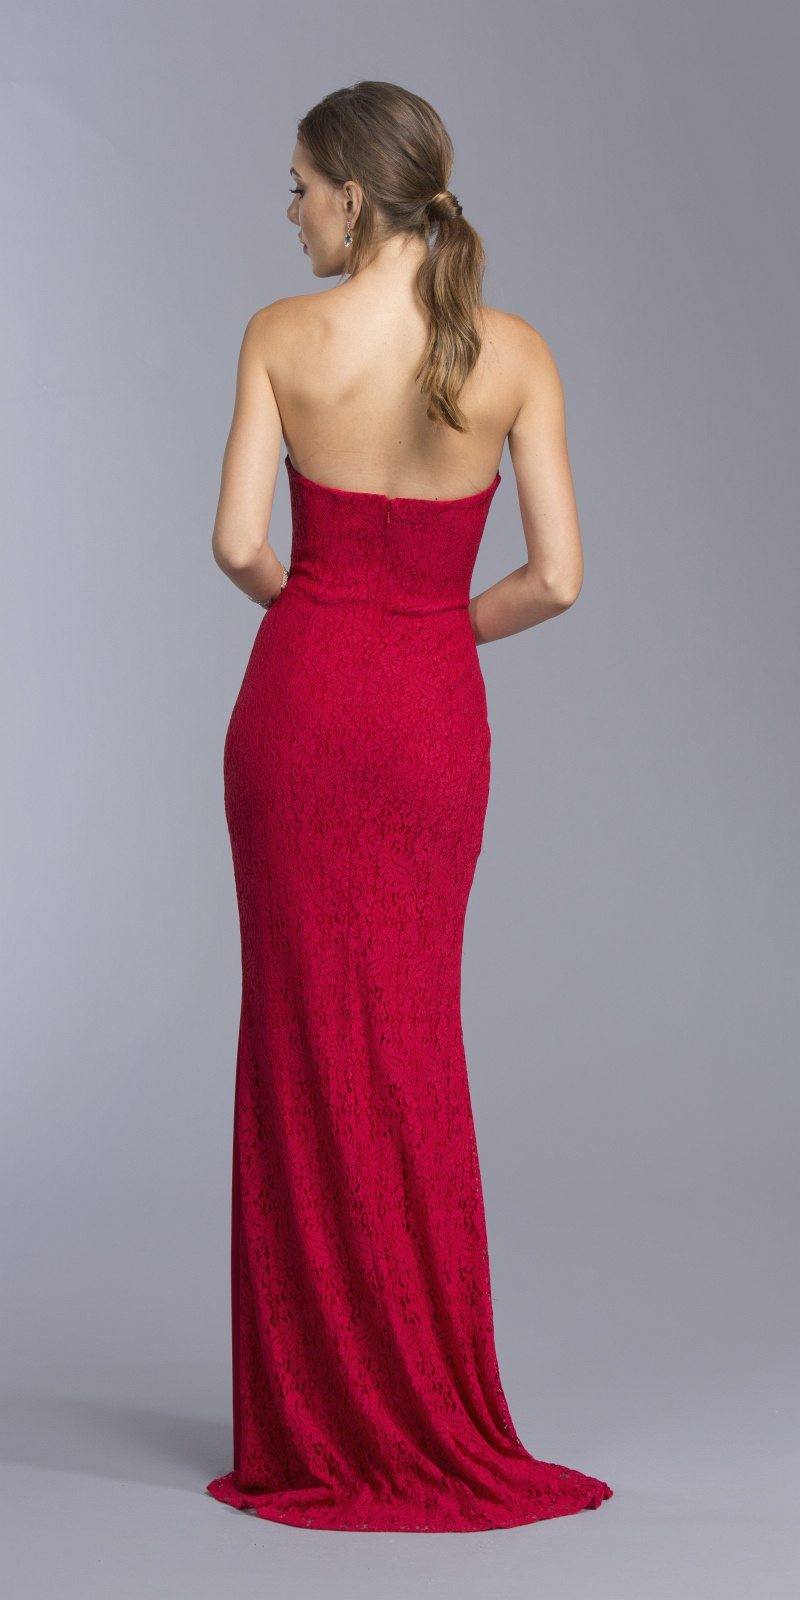 Red Floor-Length Strapless Dress with Sweetheart Neckline